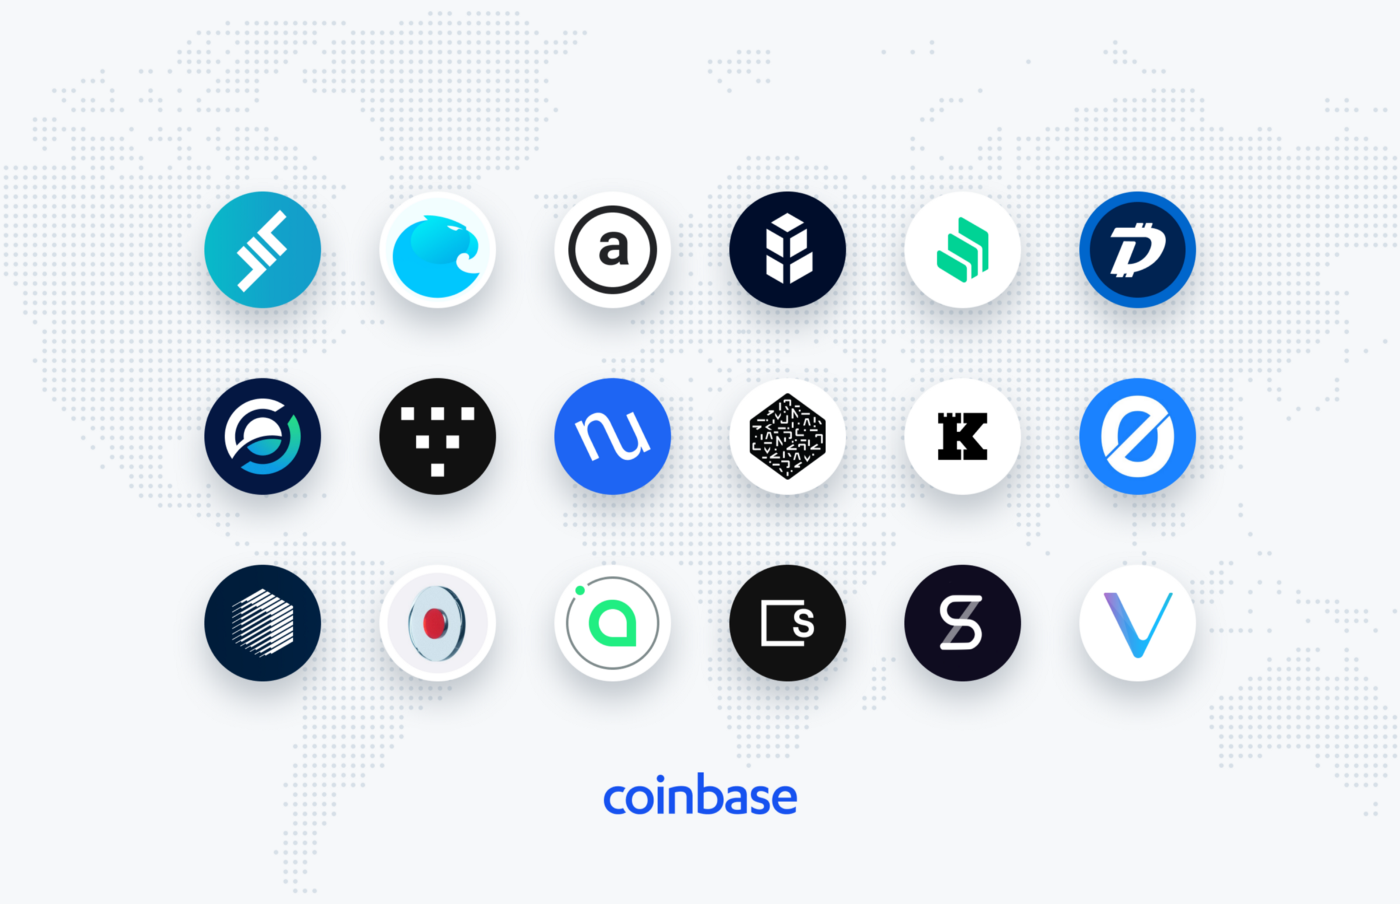 Coins Coinbase is considering adding.